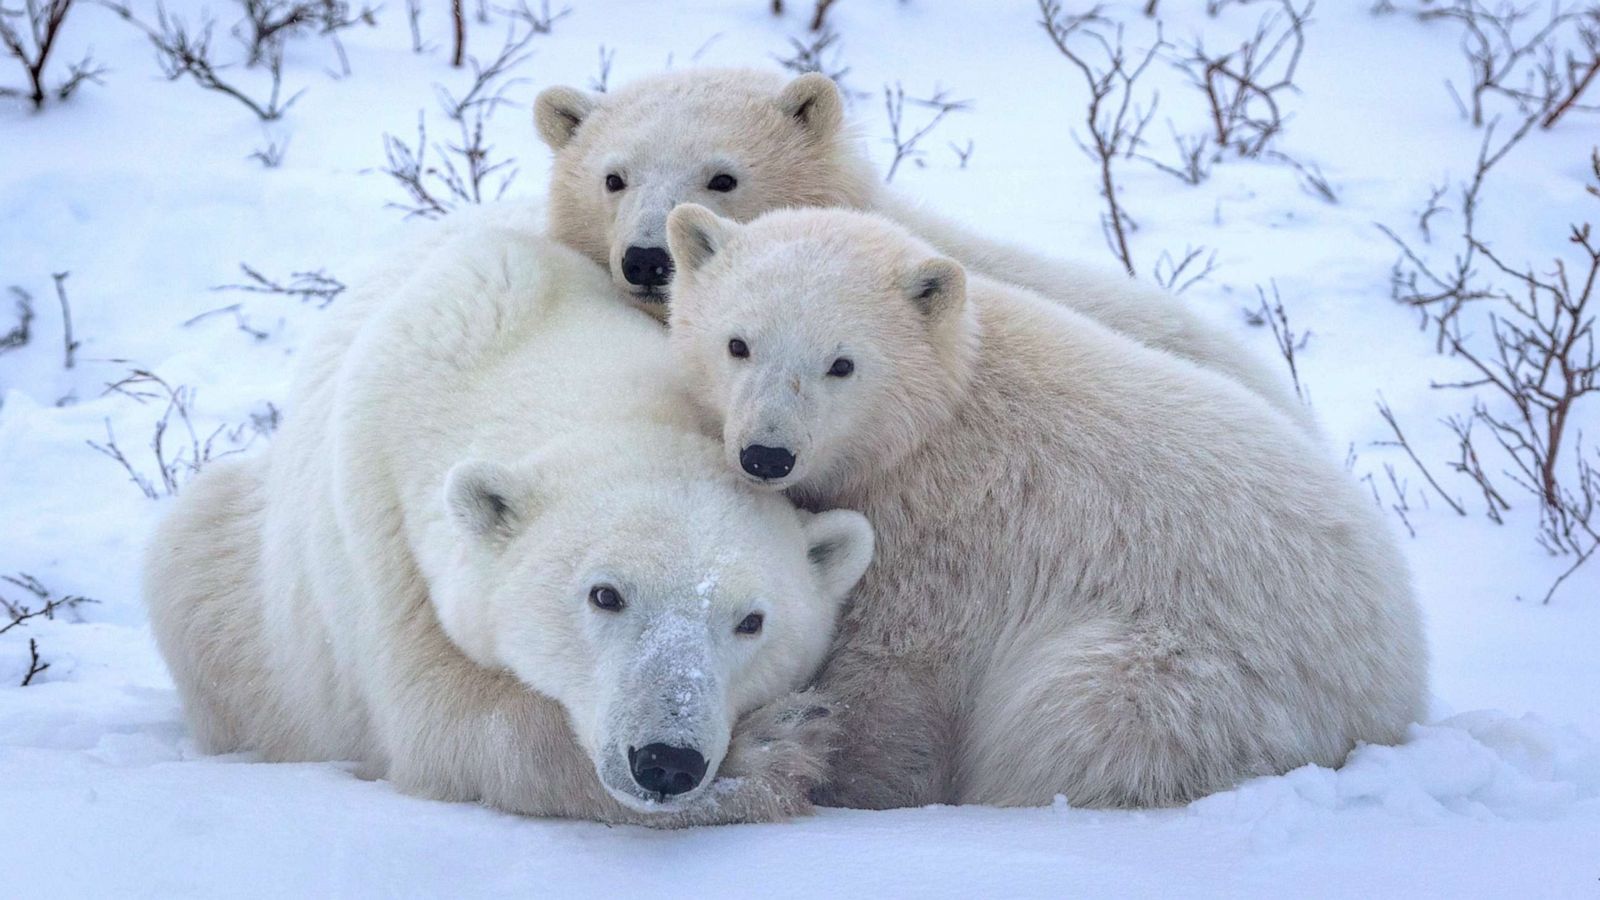 Earth Day 2022: Save polar bears by protecting mothers and cubs, experts  say - ABC News